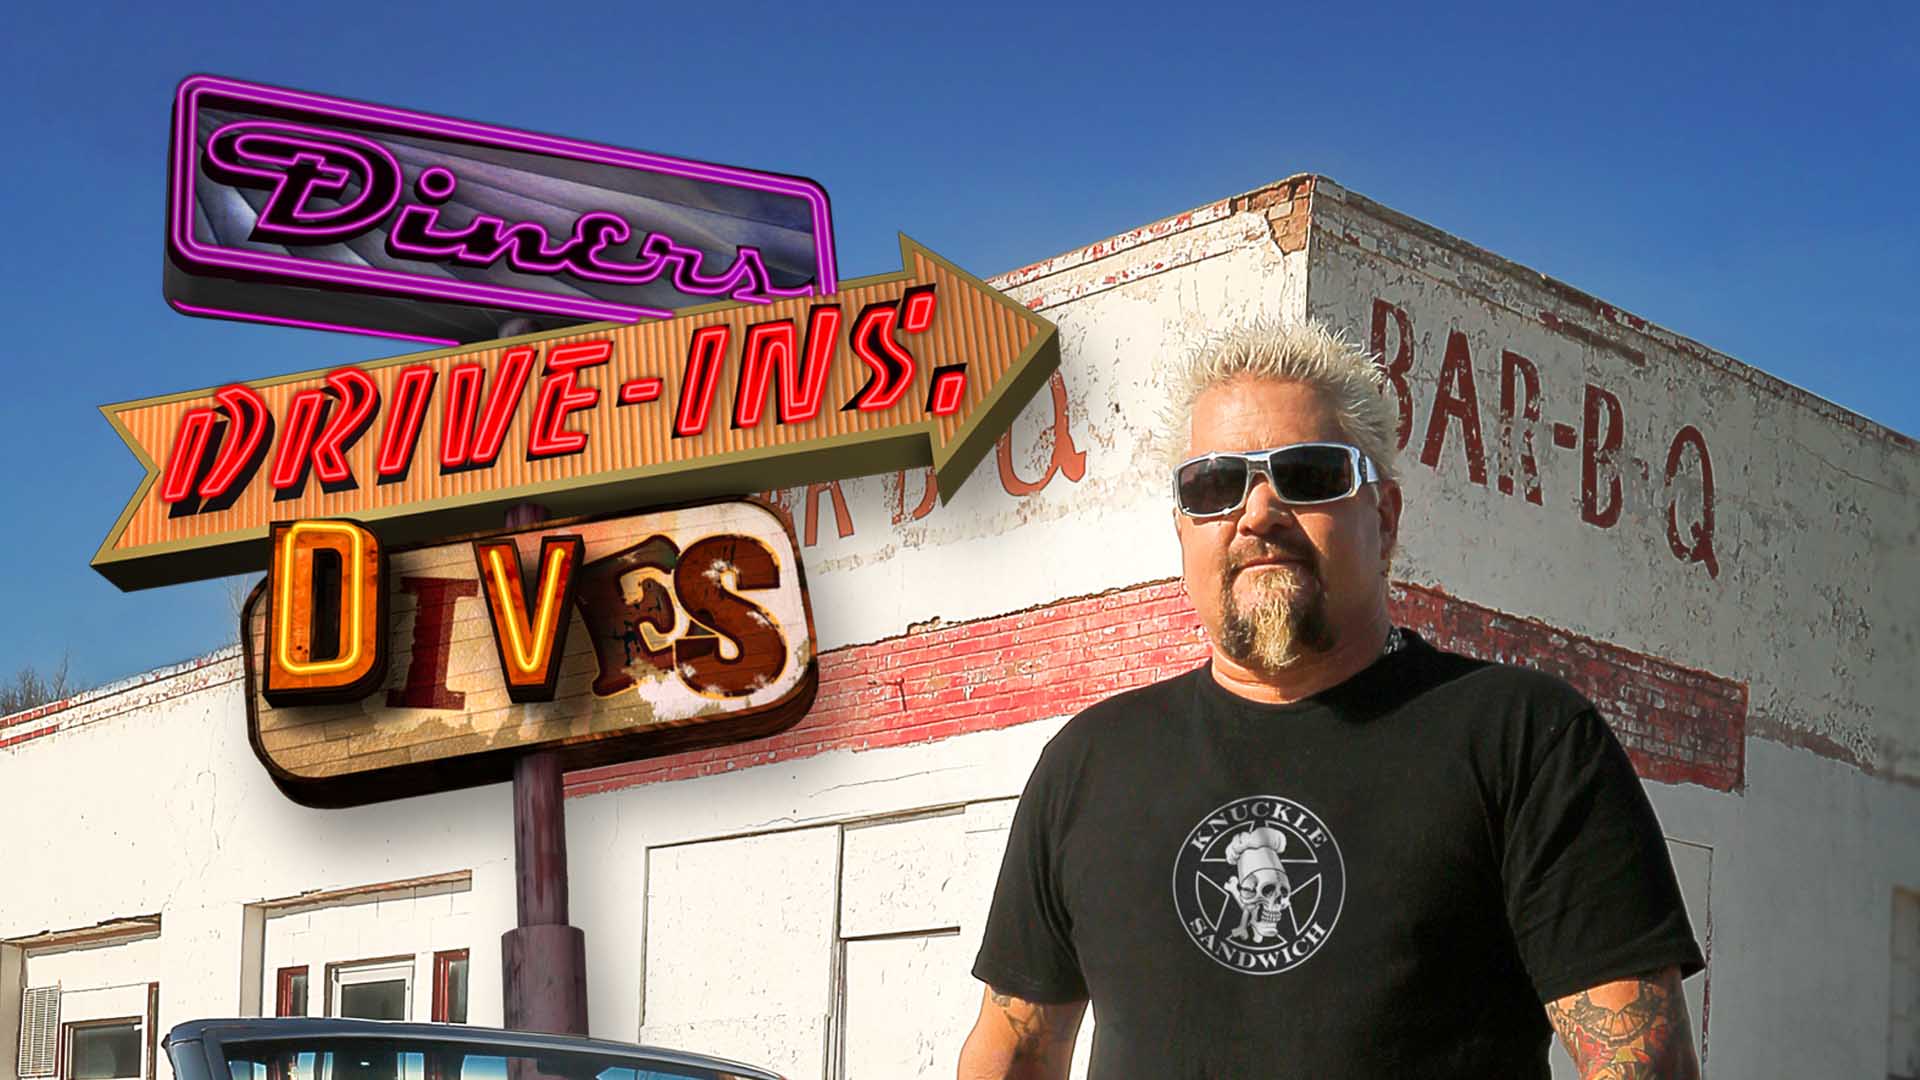 Diners Drive Ins And Dives 1 